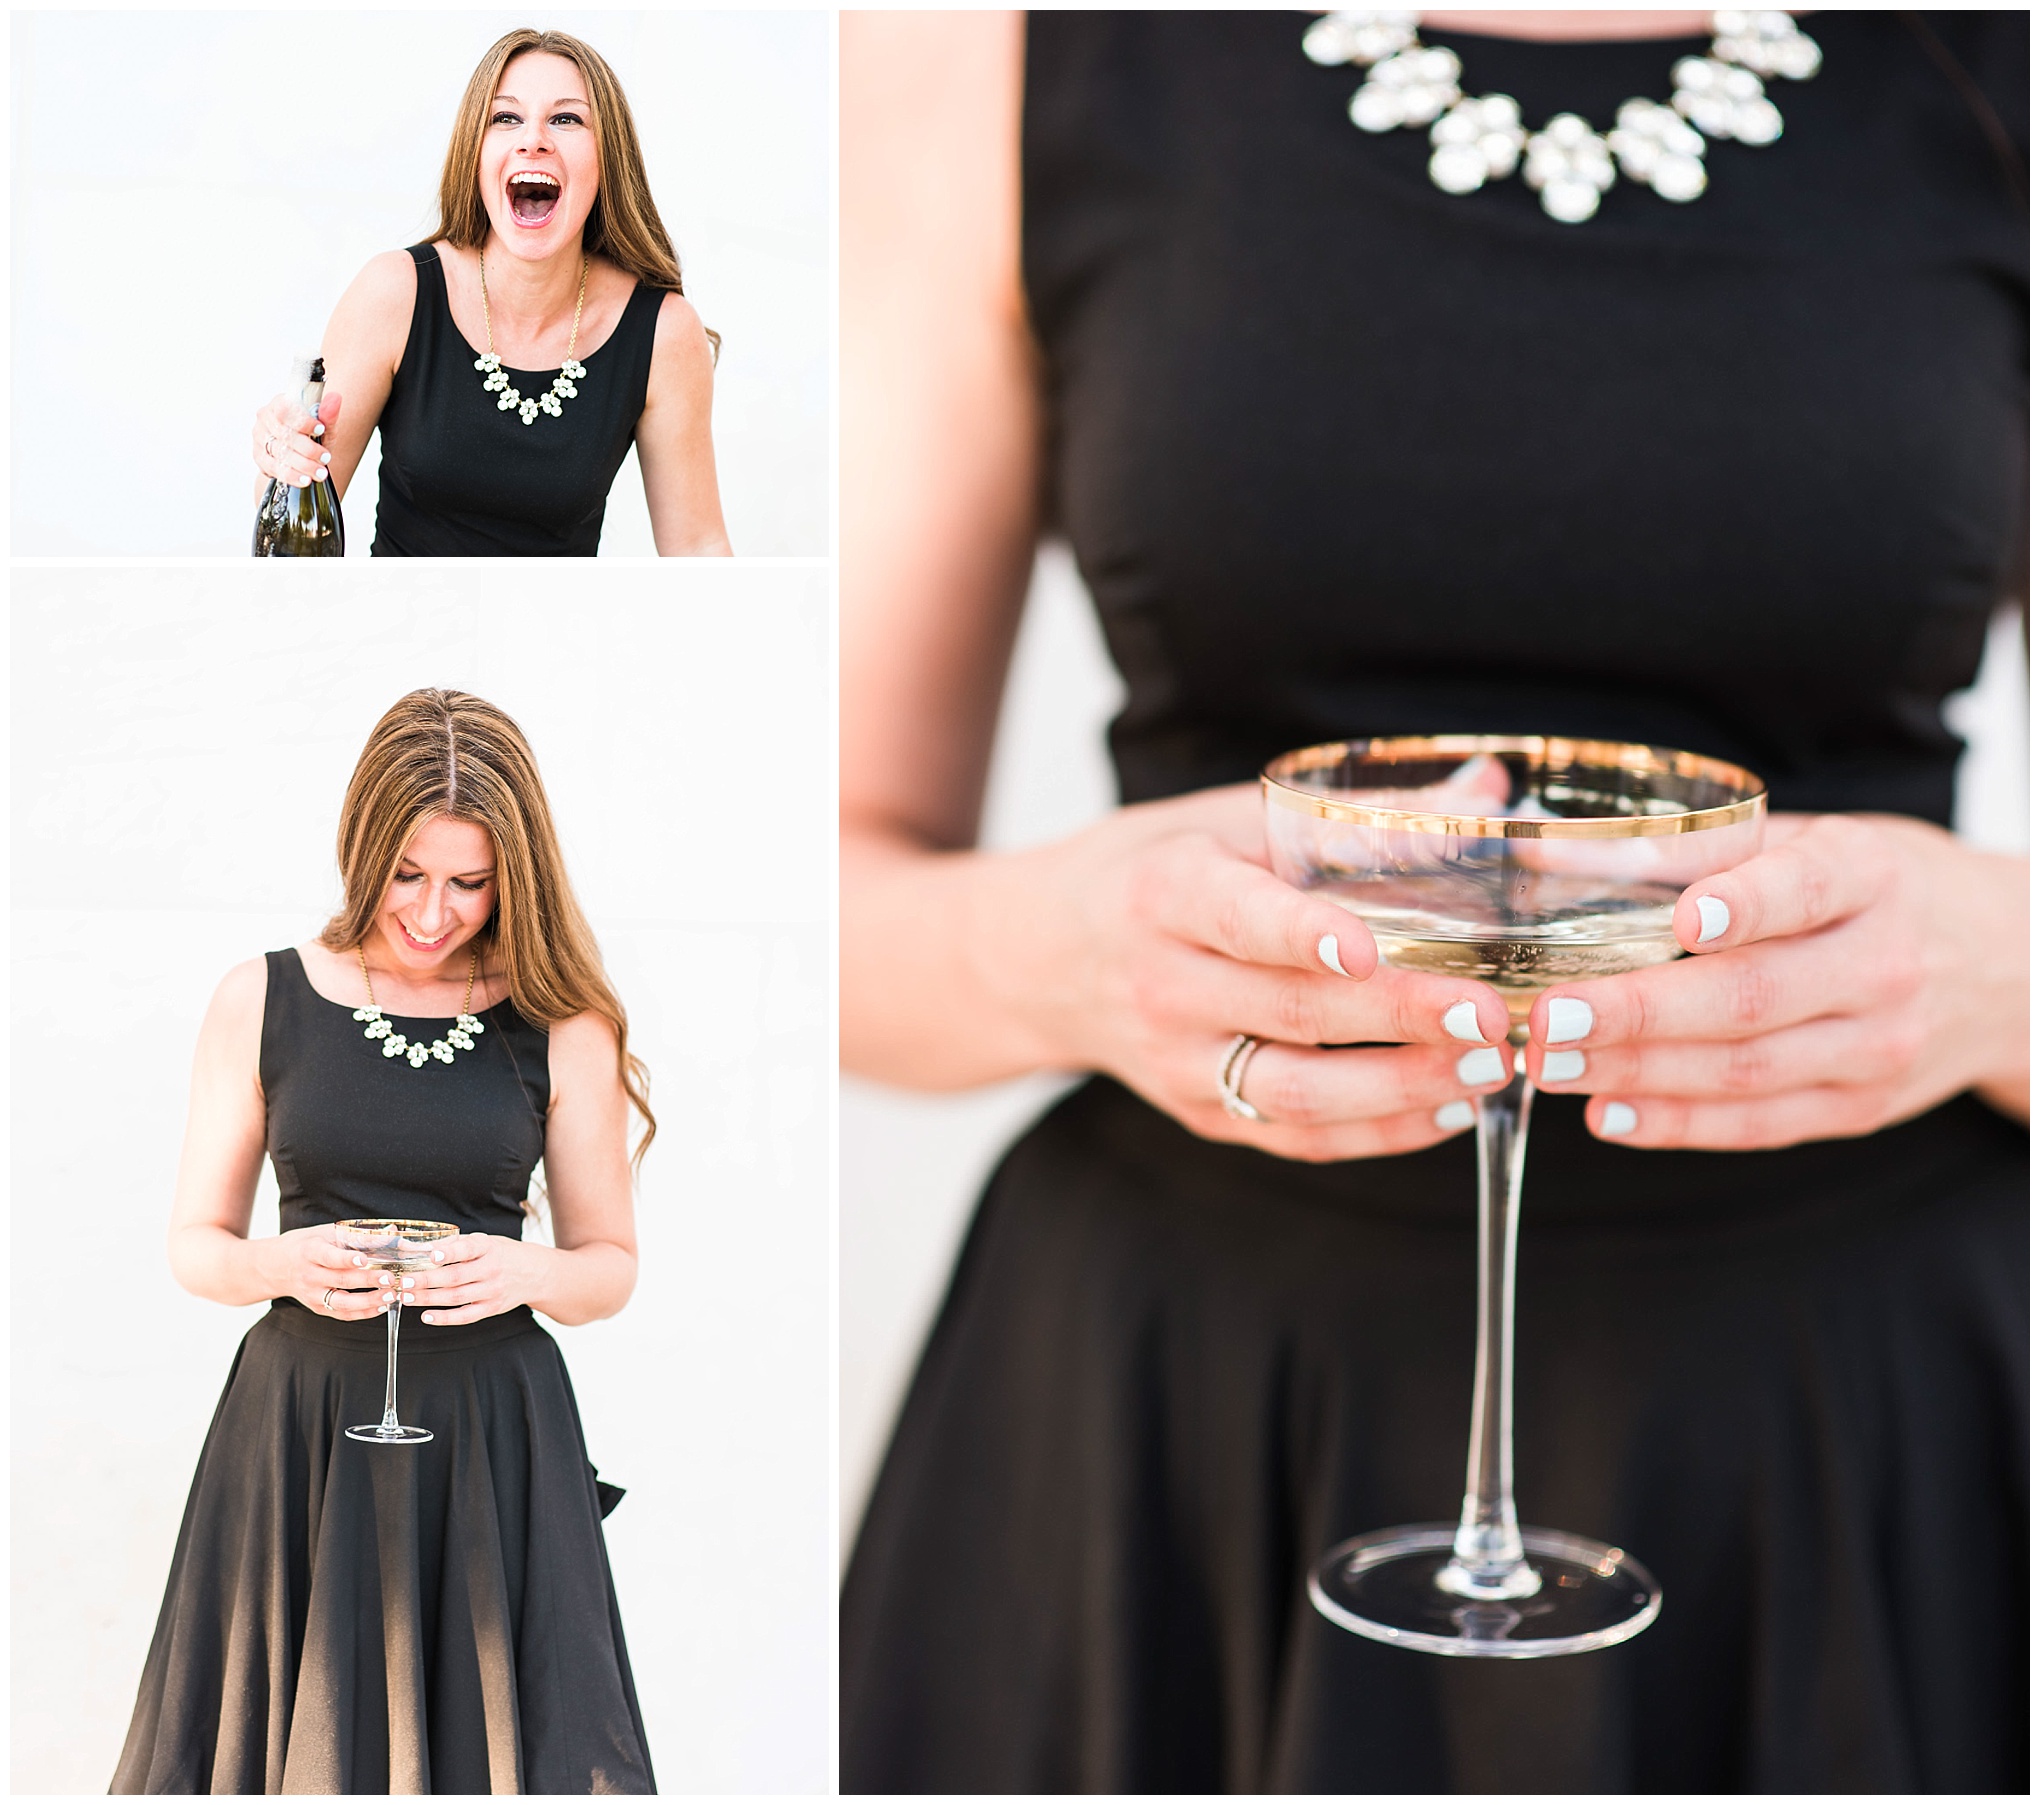 photography website launch, website launch, D.C. photographer, D.C. wedding photographer, D.C., headshots, branding session, J. Crew, The Kennedy Center, black dress, Rent The Runway, La Marca prosecco, prosecco, champagne saucer, J.Crew, statement necklace